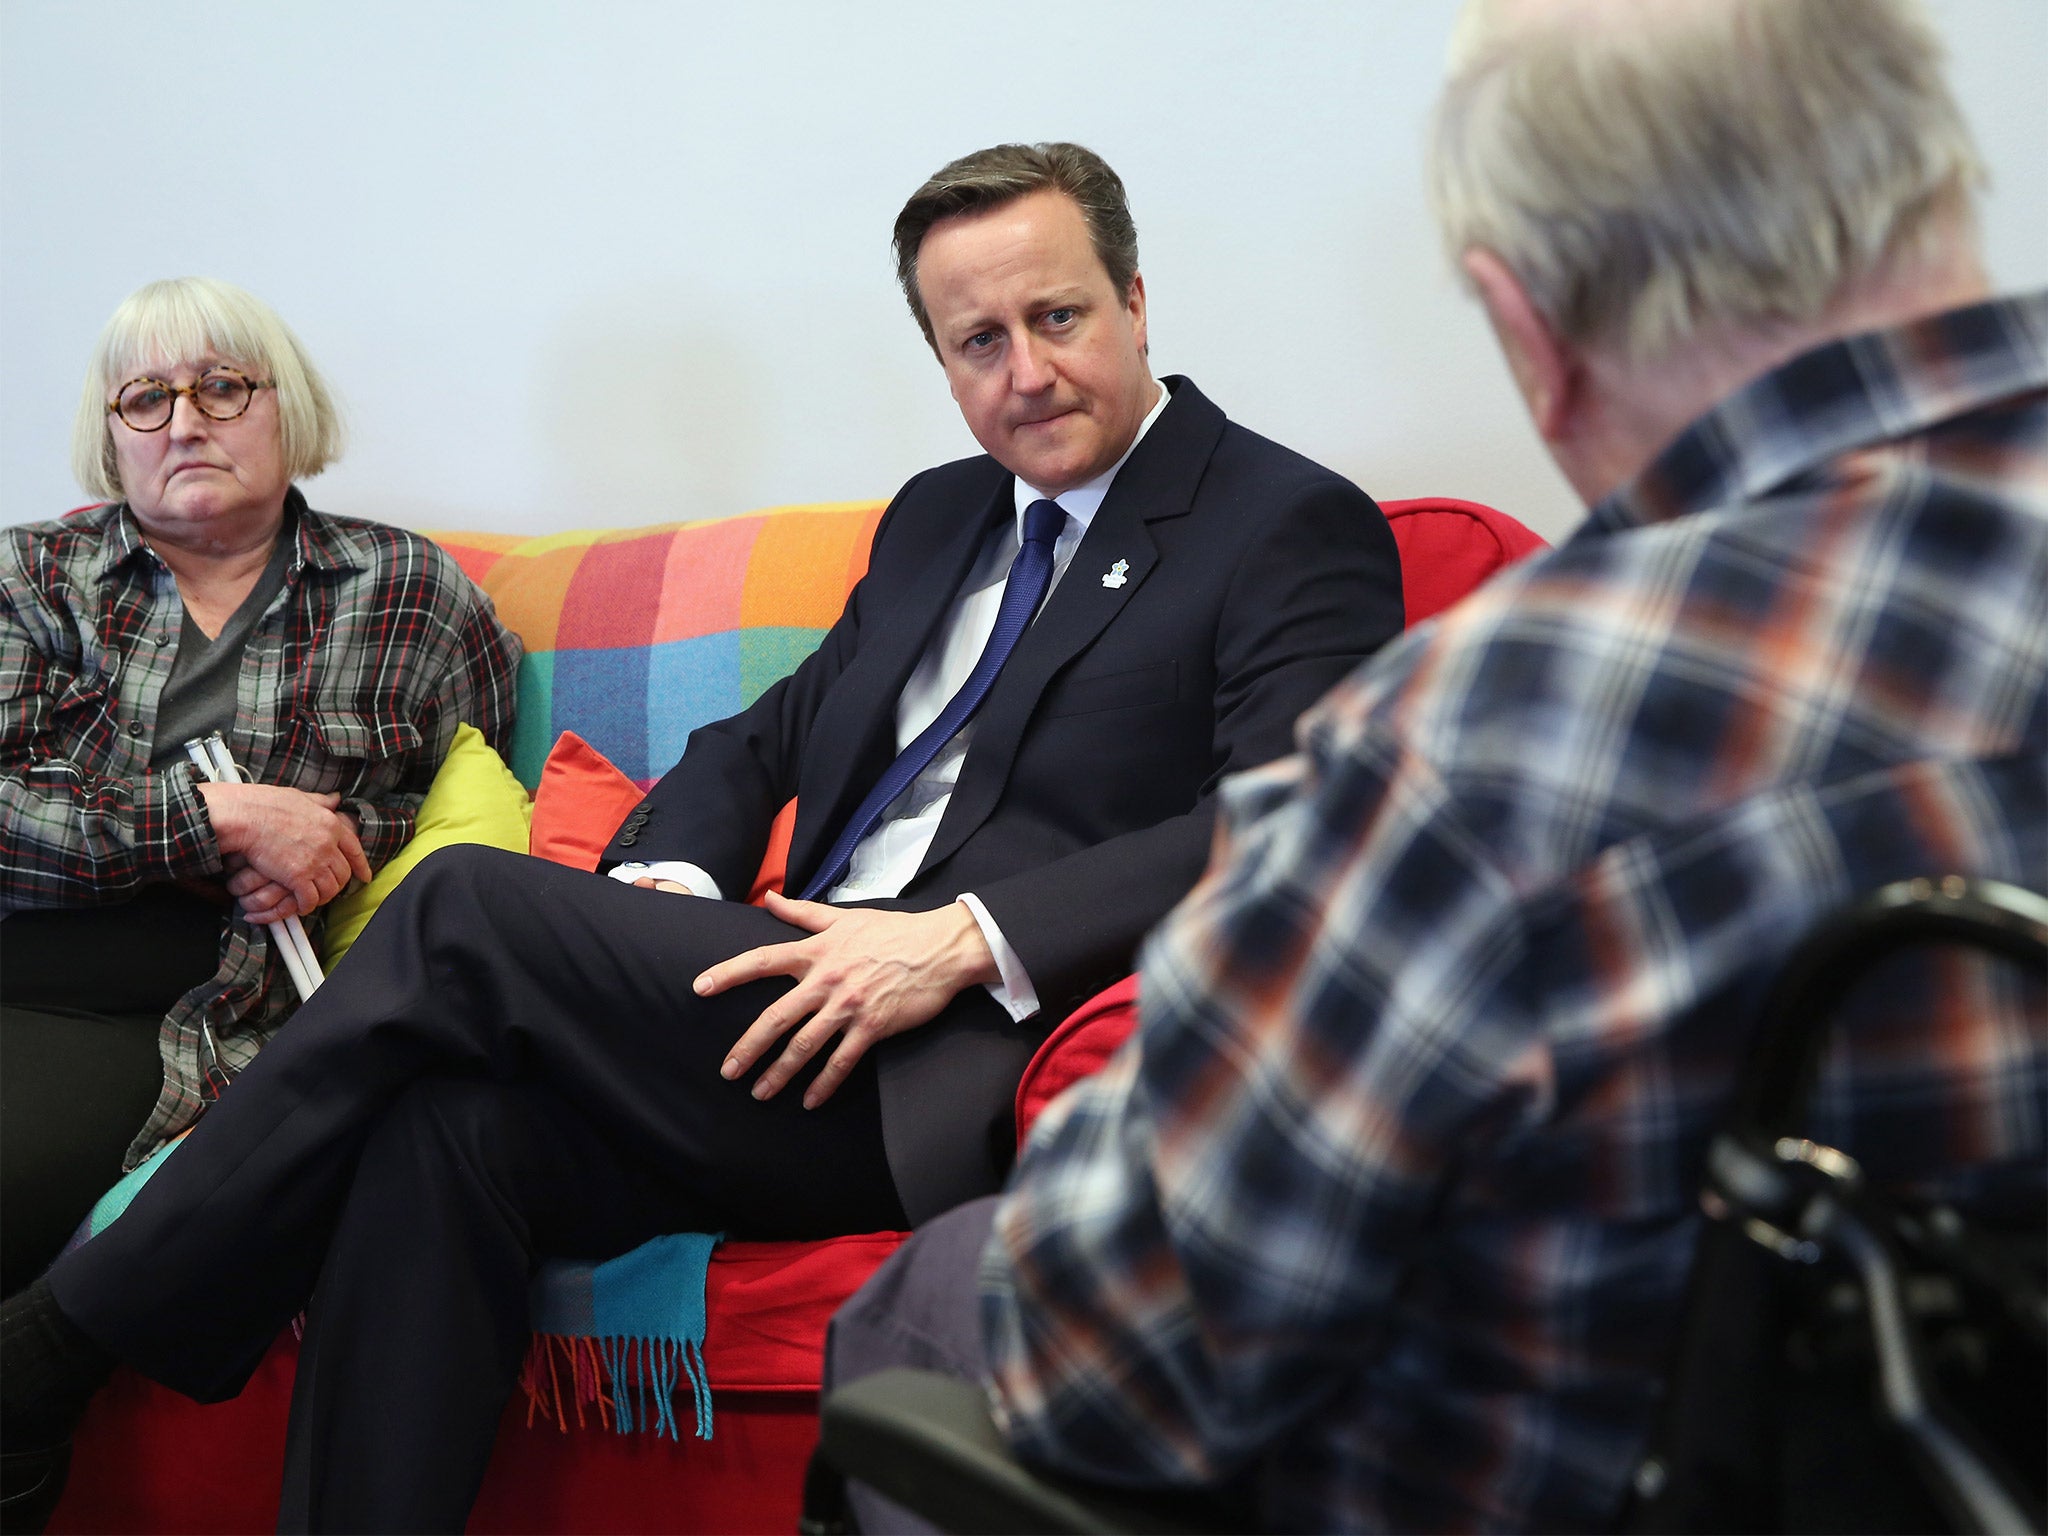 The Prime Minister speaks to members of 'Age UK' after an election rally at the Queen Elizabeth II centre on Tuesday